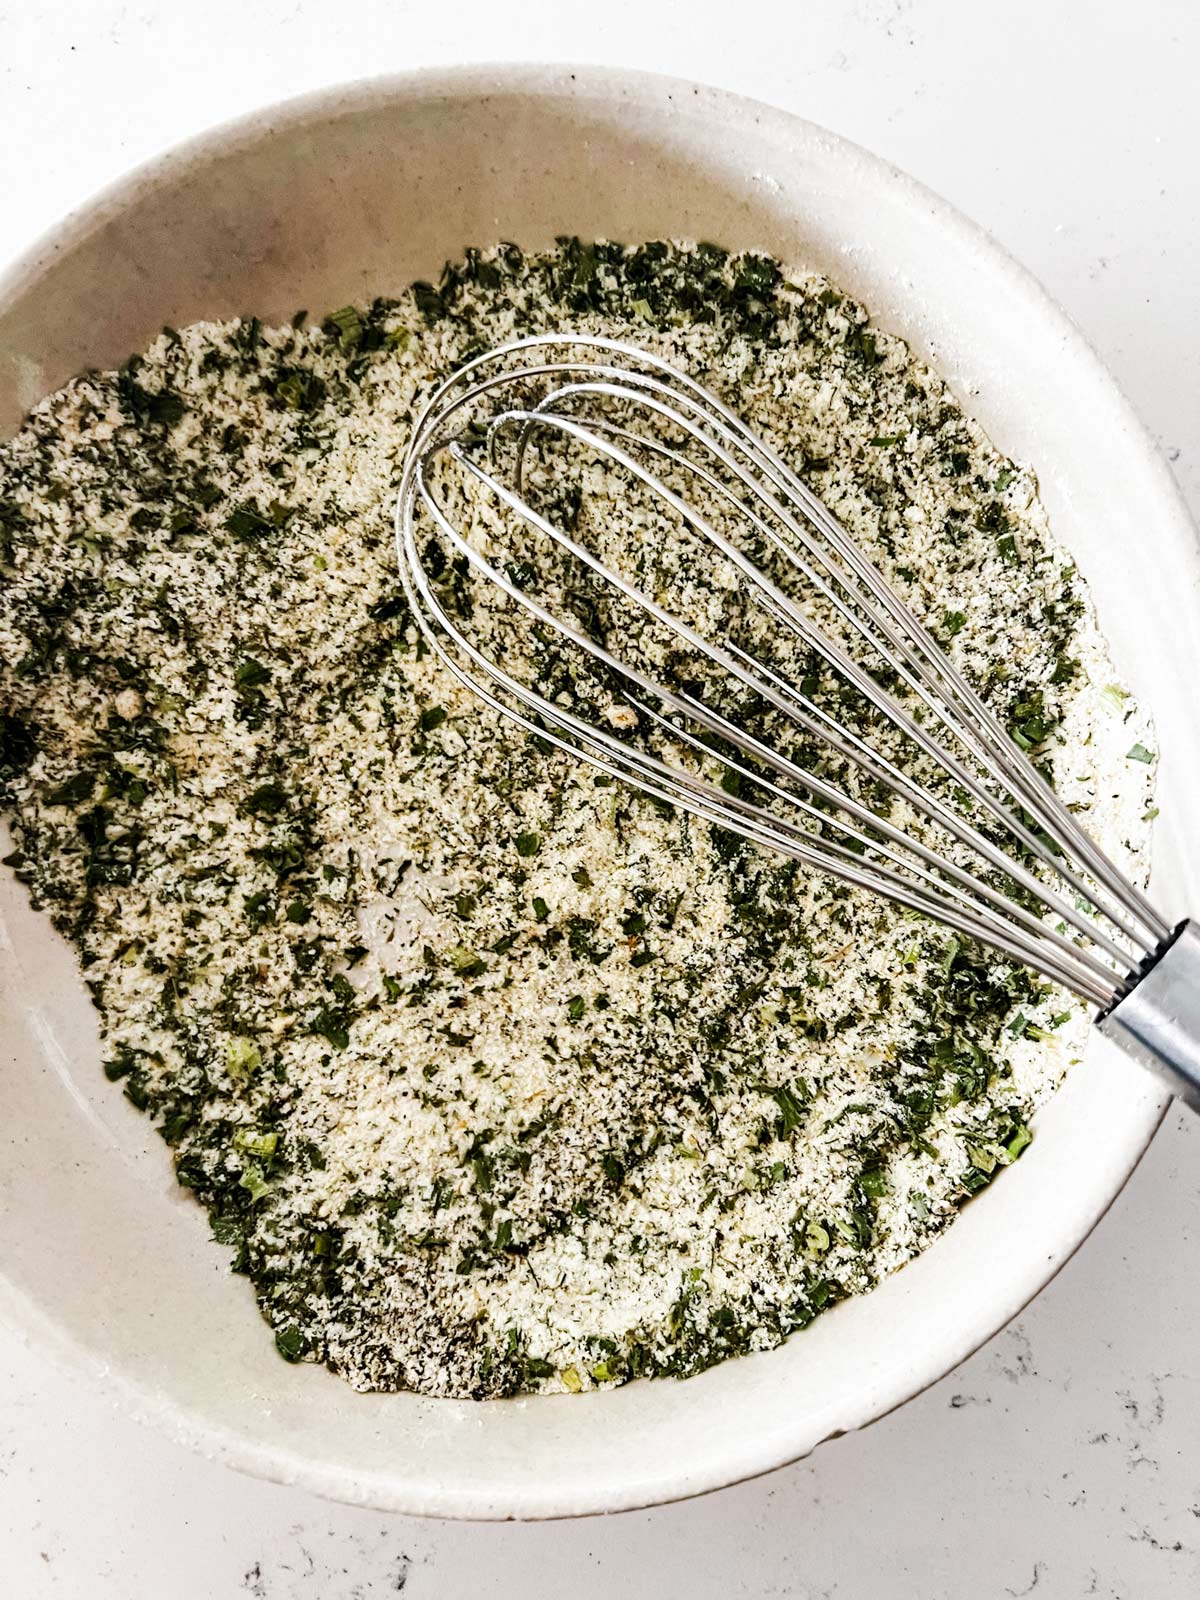 Dried buttermilk powder, crushed dried parsley leaves, dried chives, garlic powder, onion powder, mustard powder, dried dill, sugar, sea salt, and freshly ground black pepper being whisked together in a bowl.